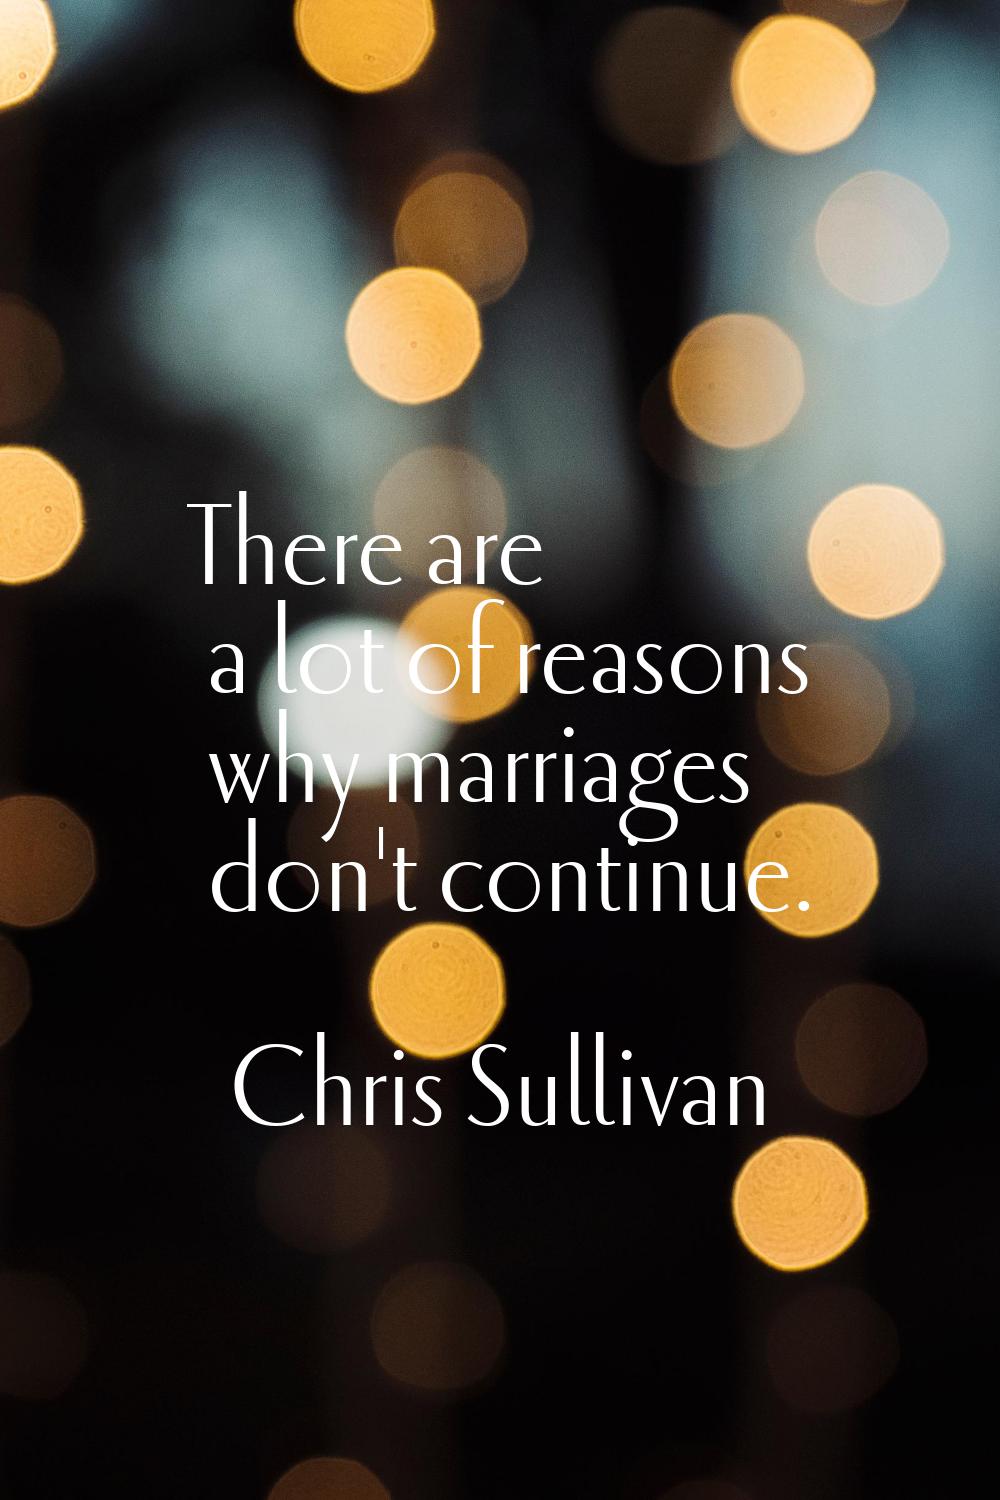 There are a lot of reasons why marriages don't continue.